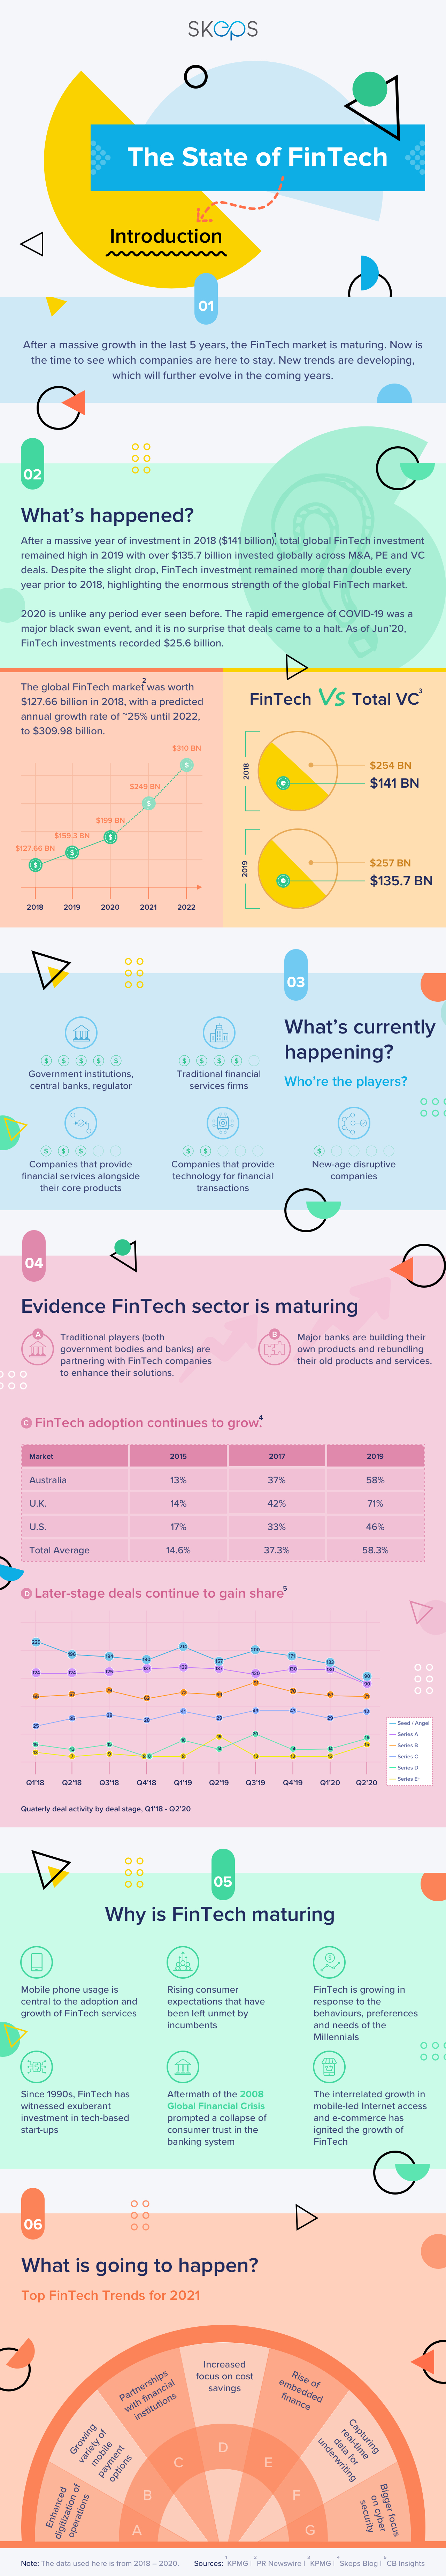 The state of the fintech industry (infographic)